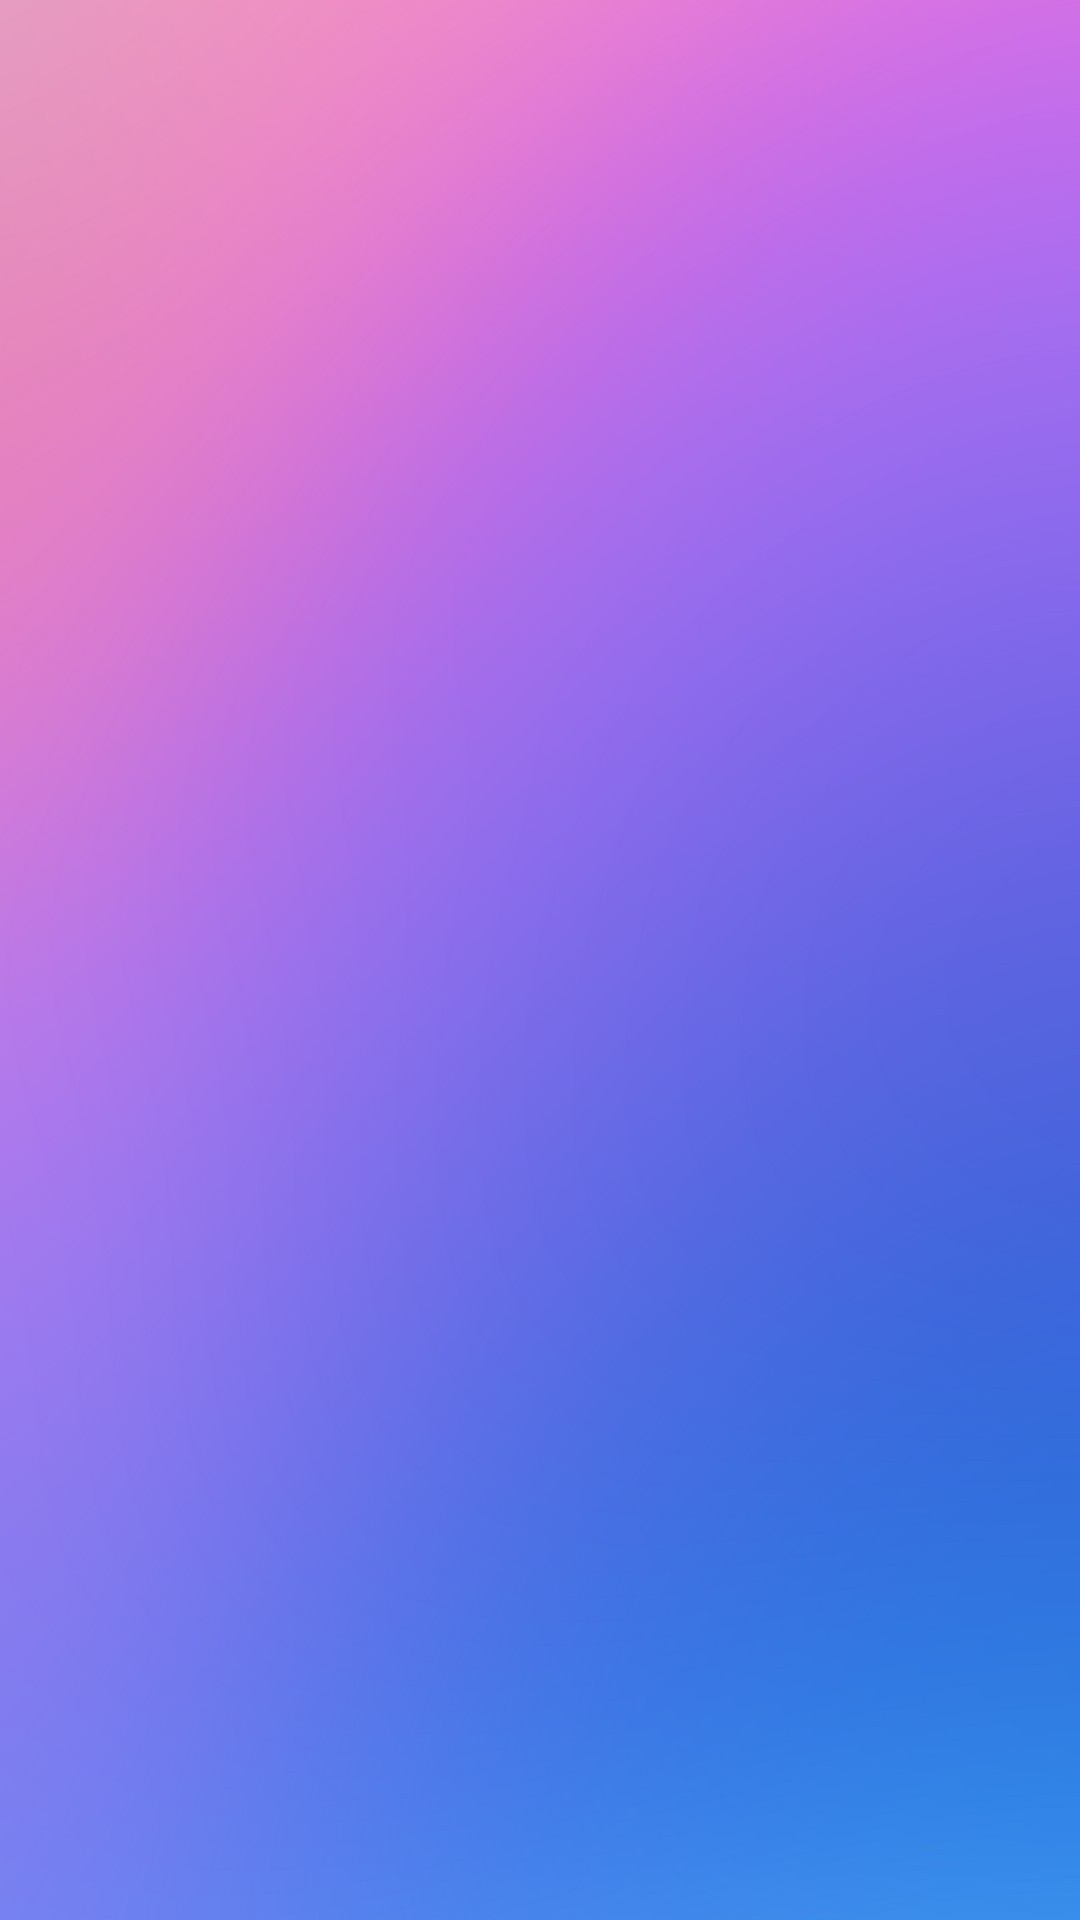 Gradient Phone 8 Wallpaper with high-resolution 1080x1920 pixel. Download all Mobile Wallpapers and Use them as wallpapers for your iPhone, Tablet, iPad, Android and other mobile devices